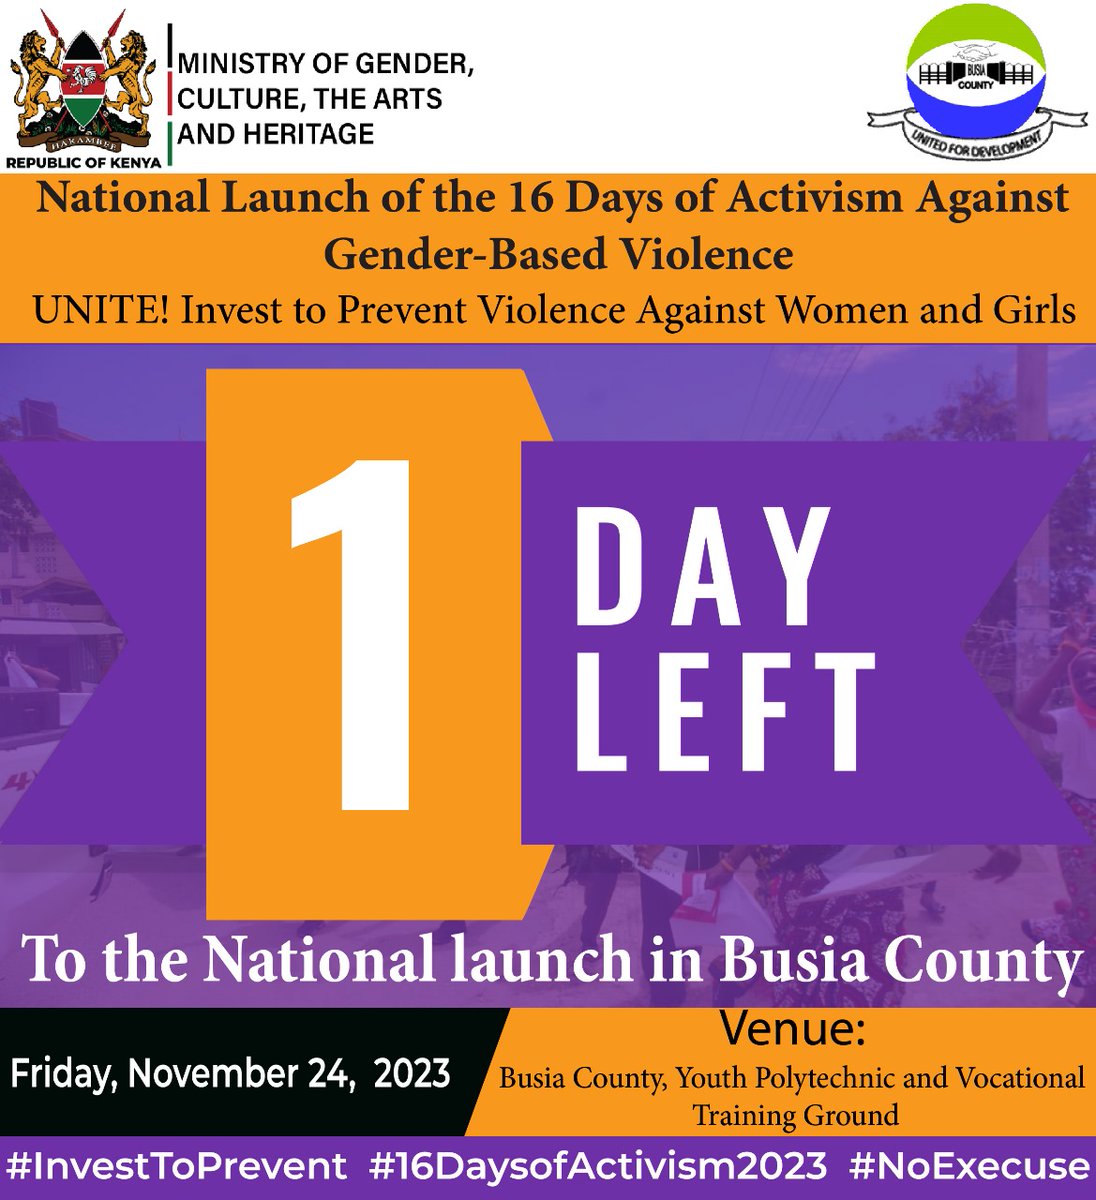 It is a matter of hours before the official launch of the #16DaysOfActivismAgainstGenderBasedViolence in #BusiaCounty. A reminder of the role we all to have to play in creating a safe & just society. Violence targeting any individual or group is violence against all. #StopGBV